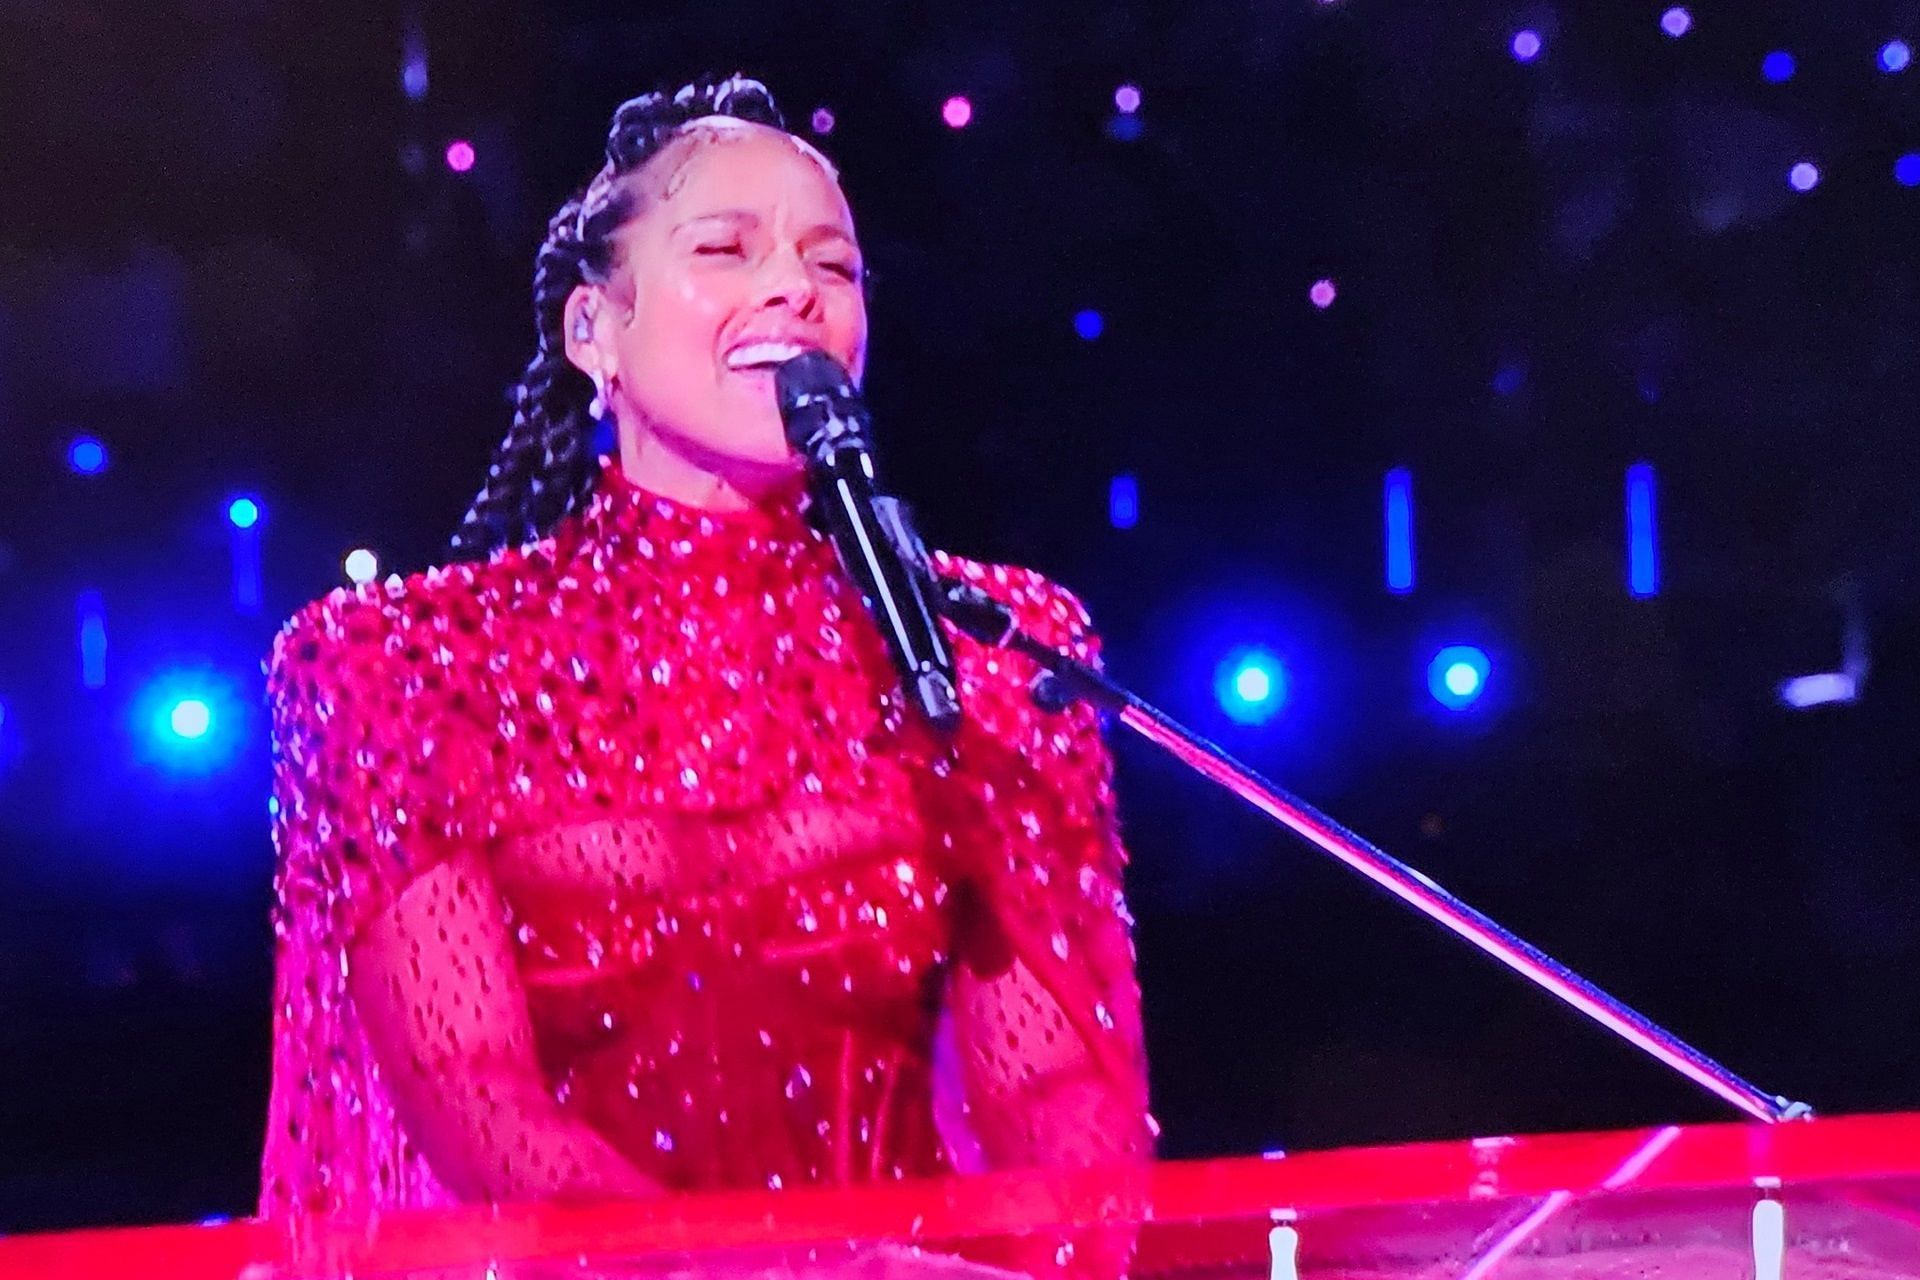 Alicia Keys ridiculed by NFL fans over Super Bowl halftime performance